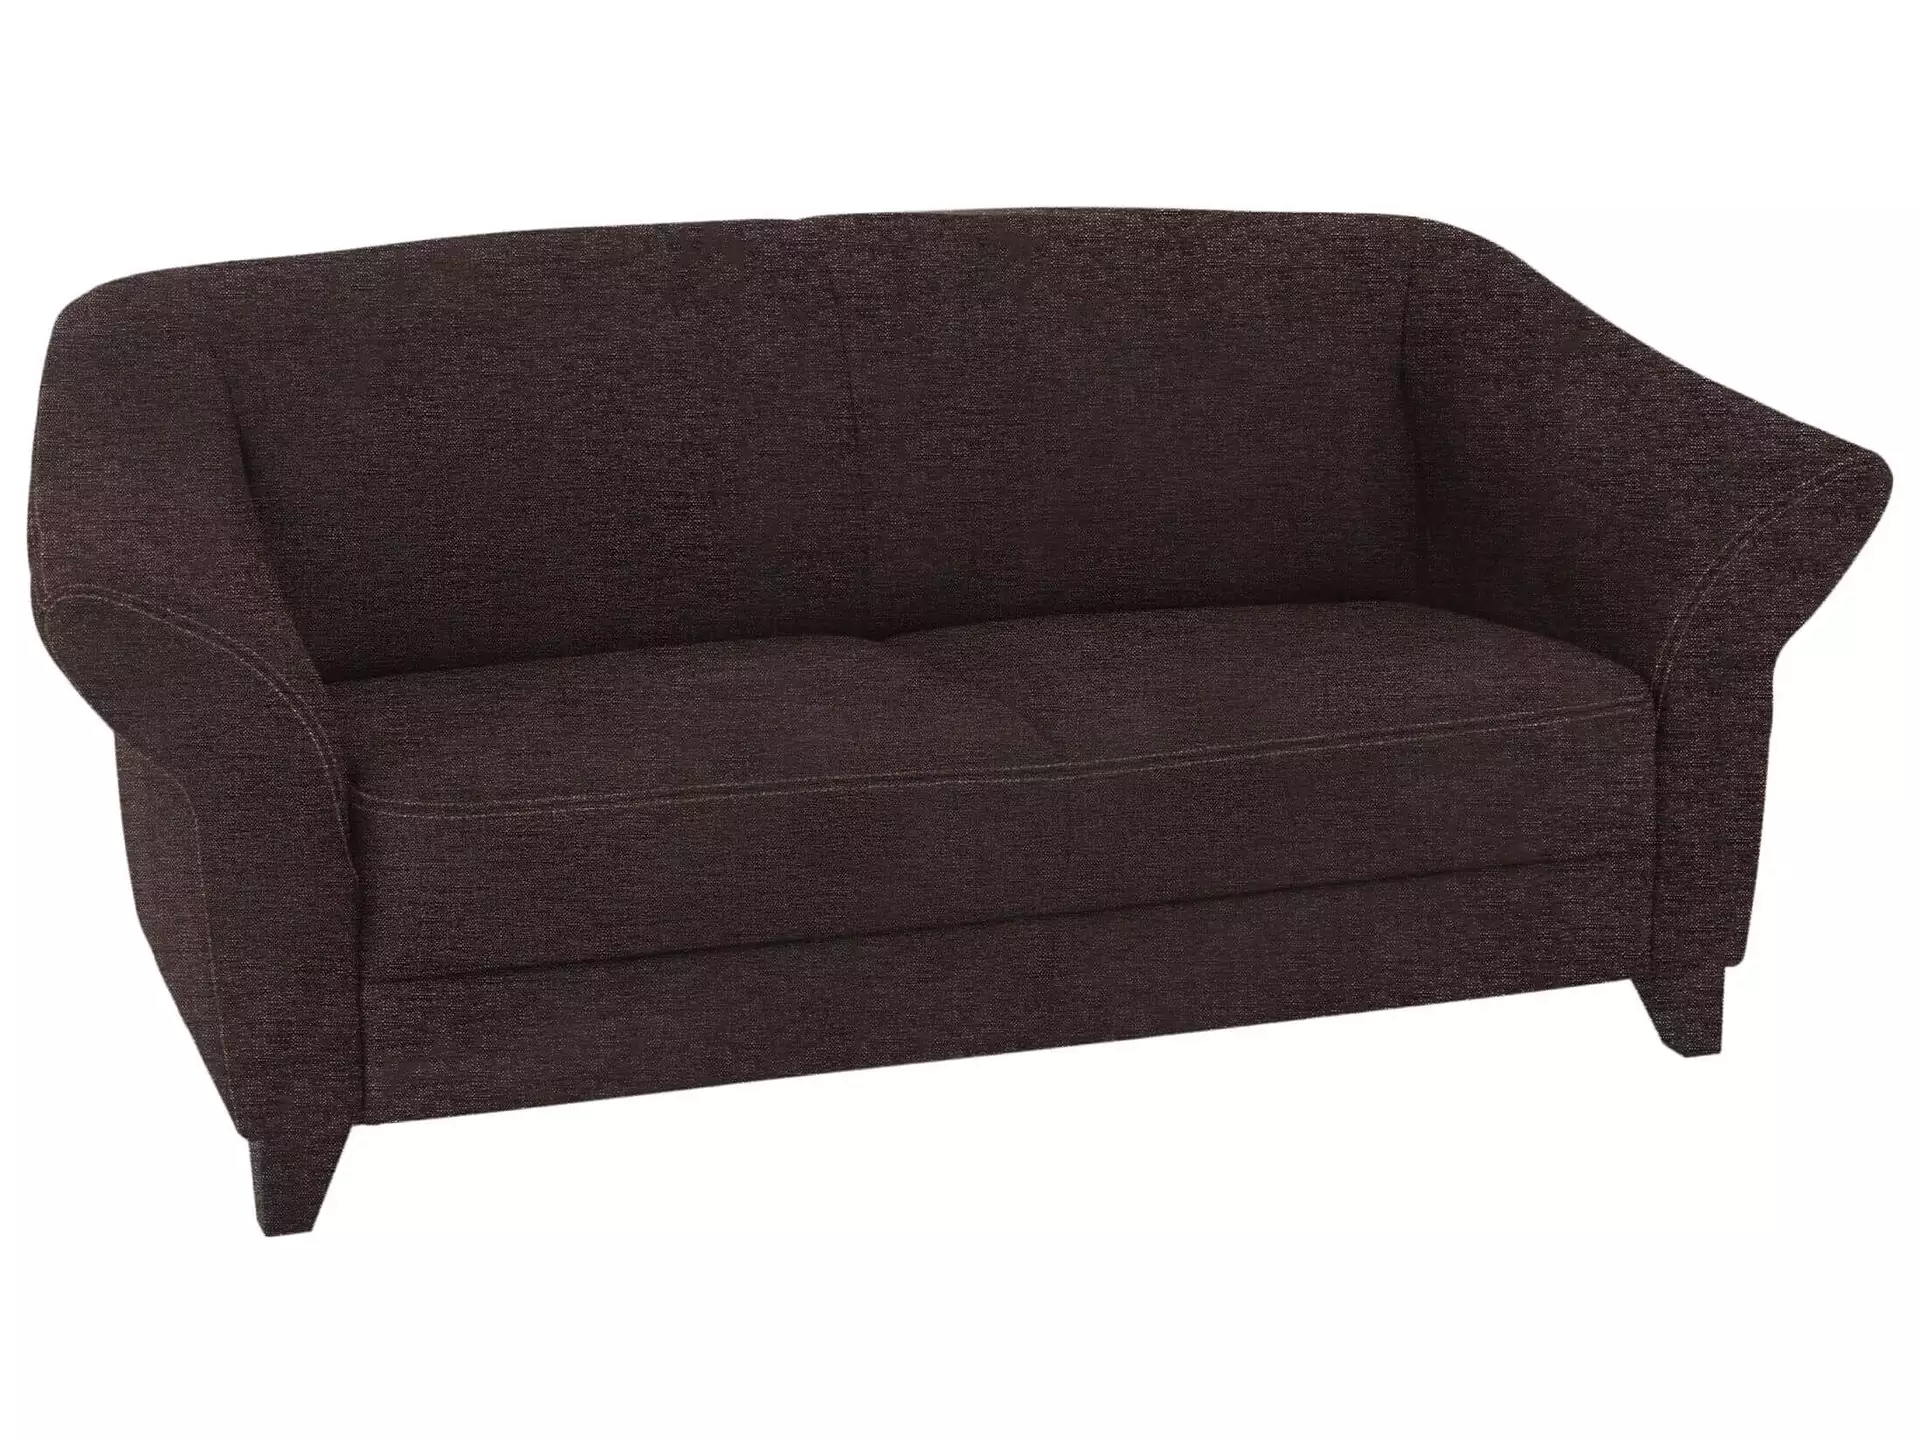 Sofa Klosters Basic Ponsel / Farbe: Anthrazit / Material: Stoff Basic